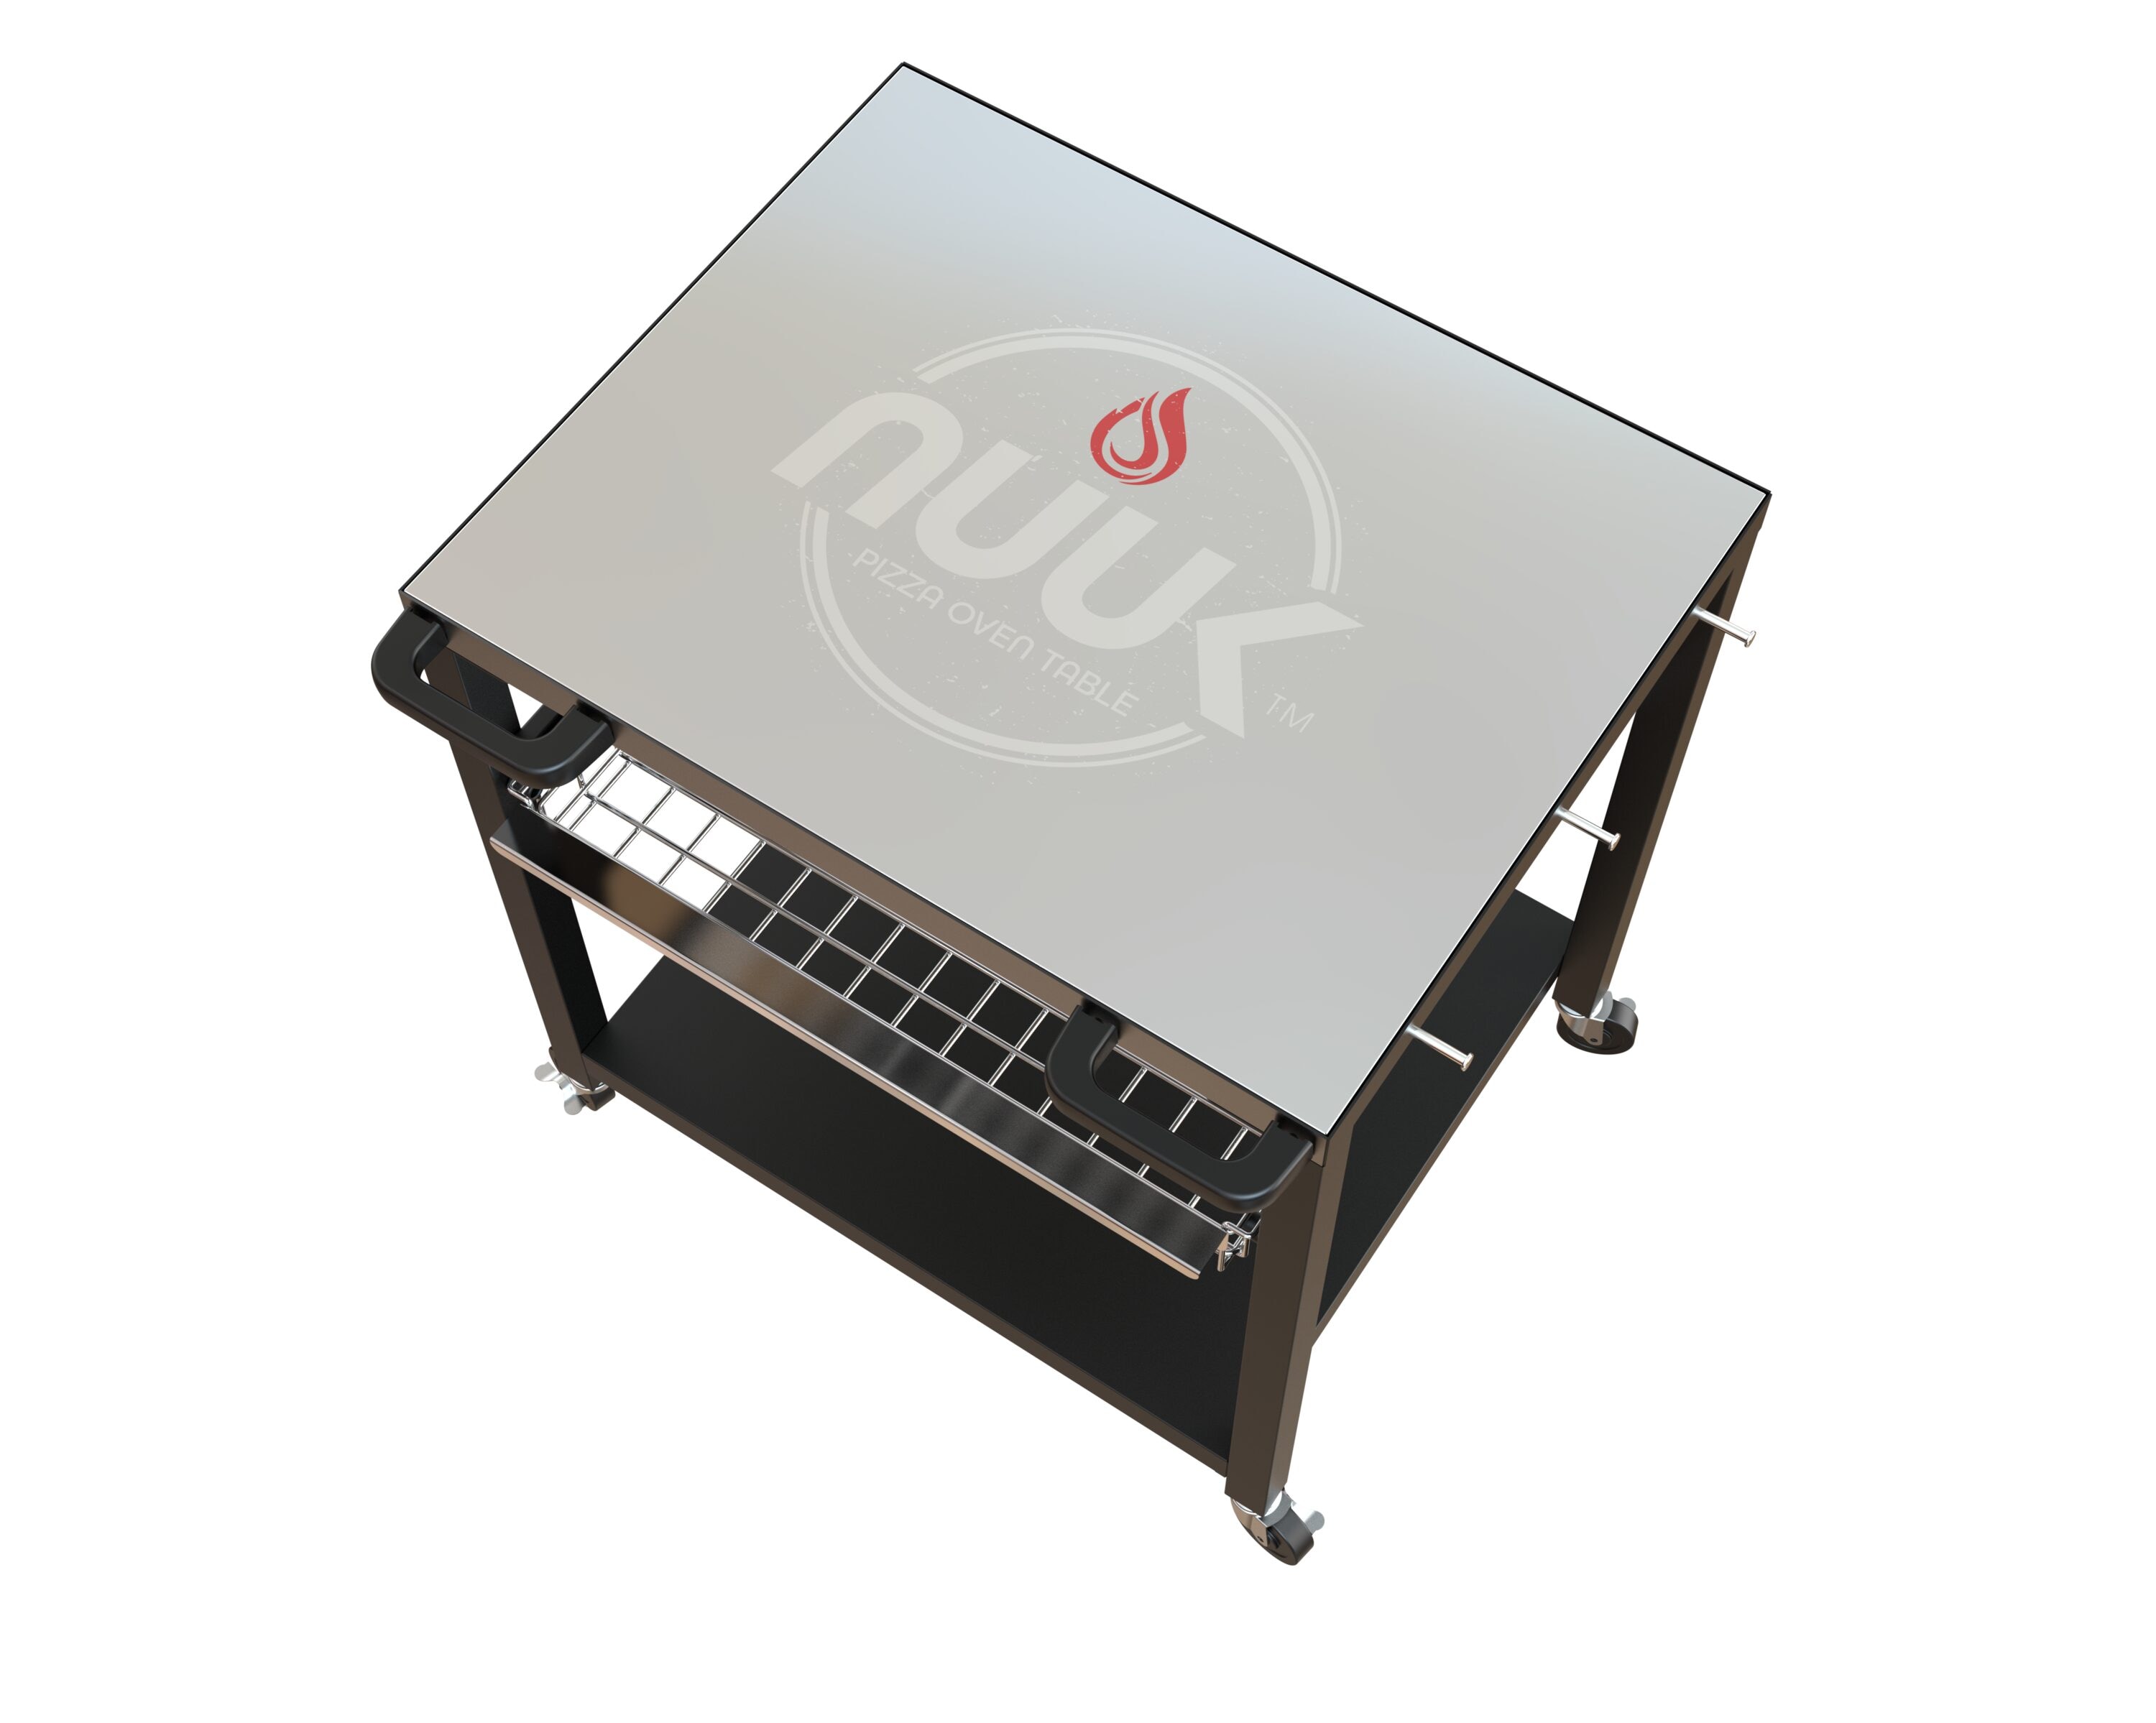 NUUK USA NUUK Grilling Grill Grill Carts Tables & the at department Steel Grill in Stands Cart